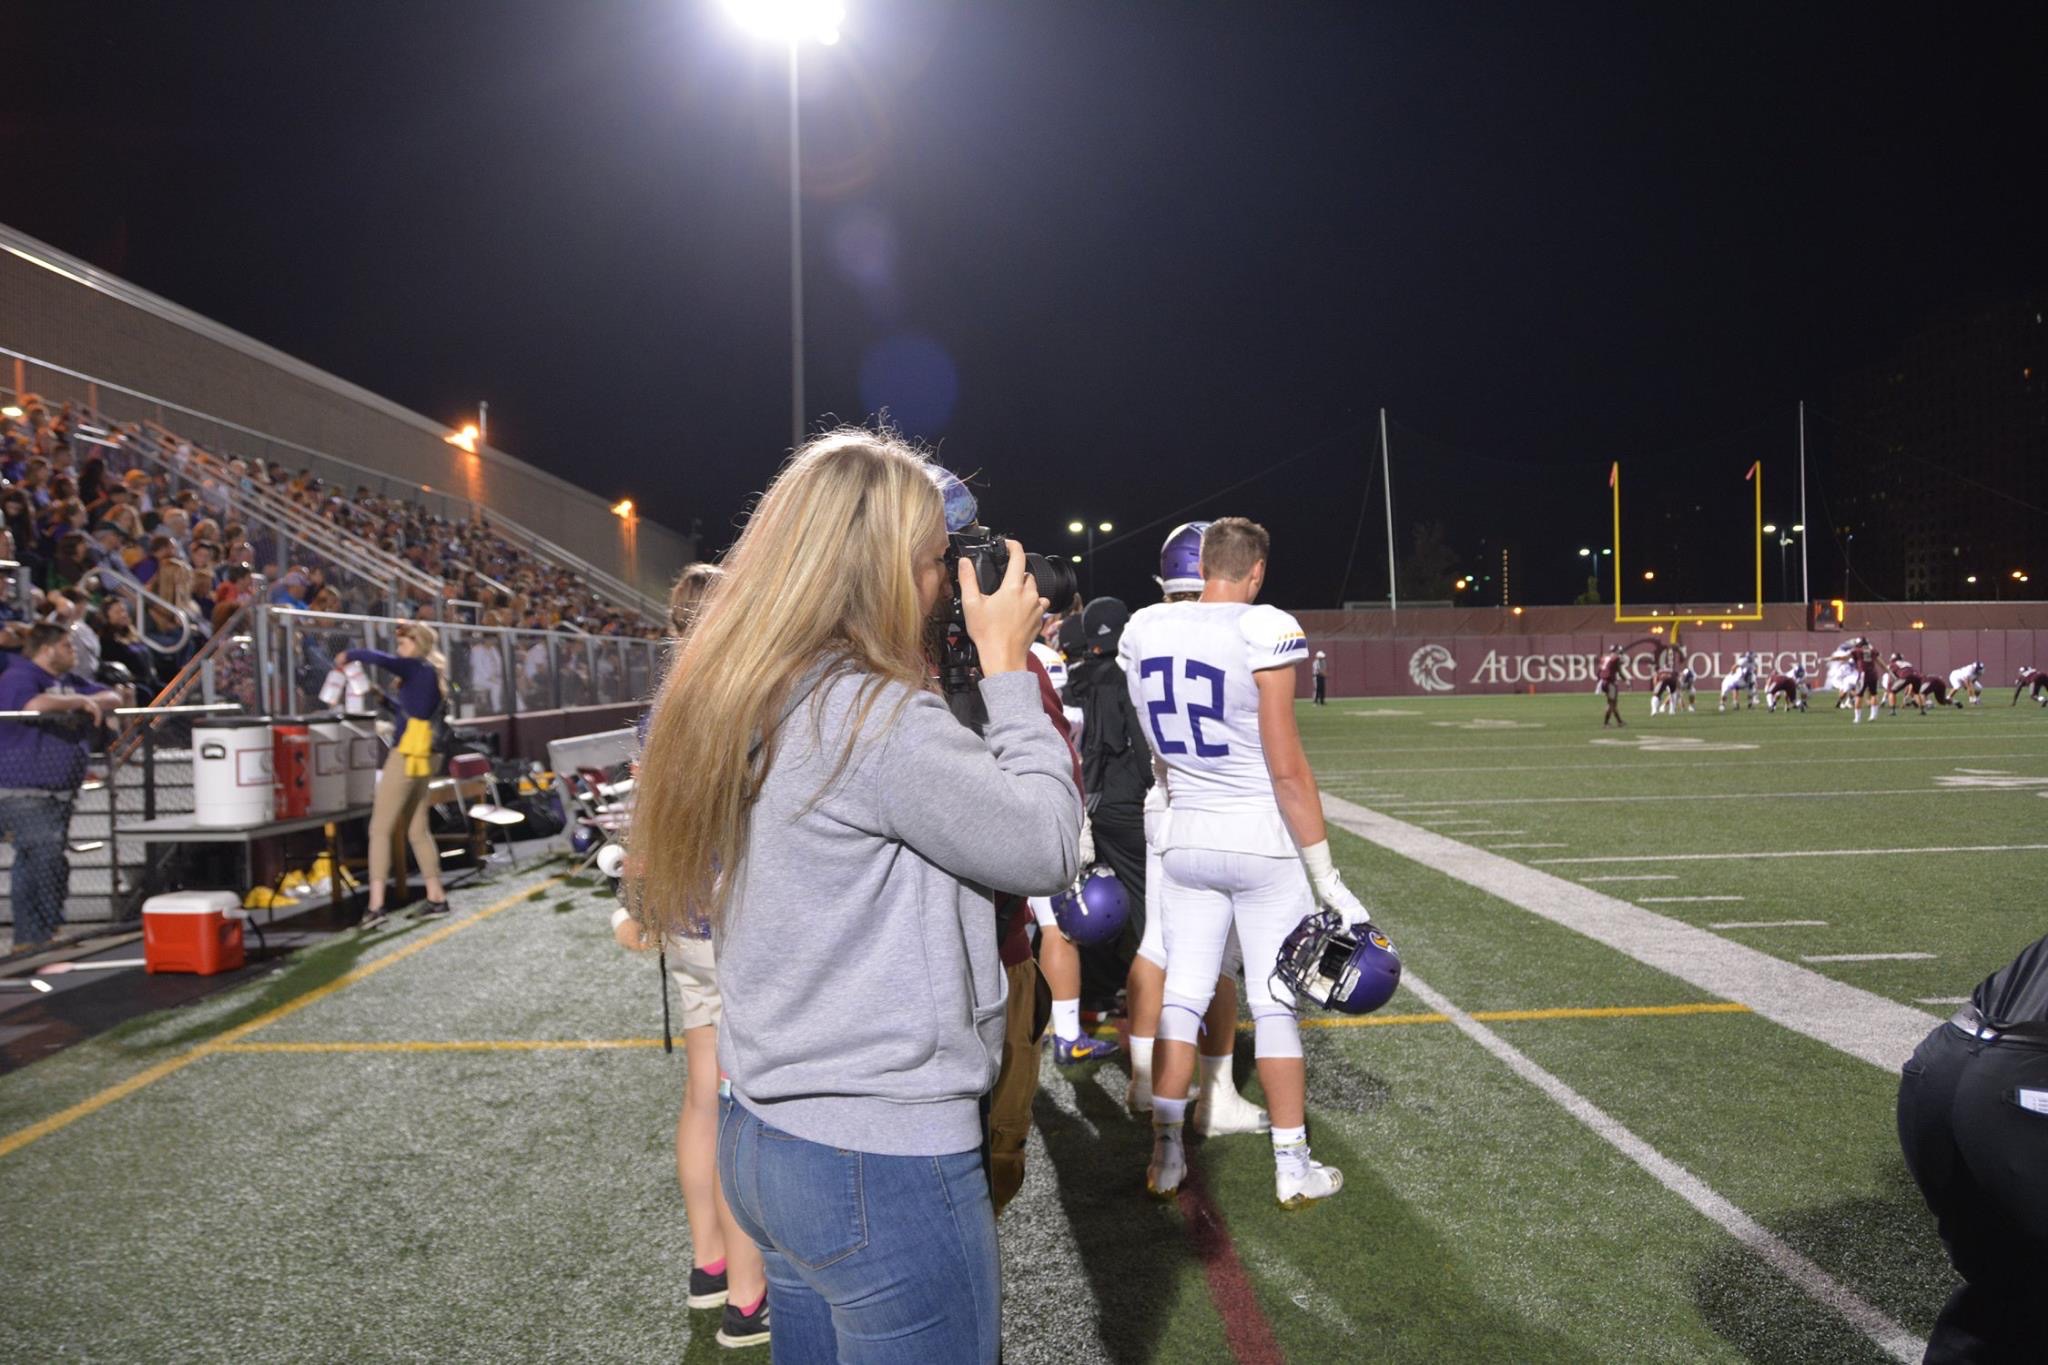 Moments by Danielle Nicole Taking Photos at UNW Football Game Day as Lead Team Photographer.